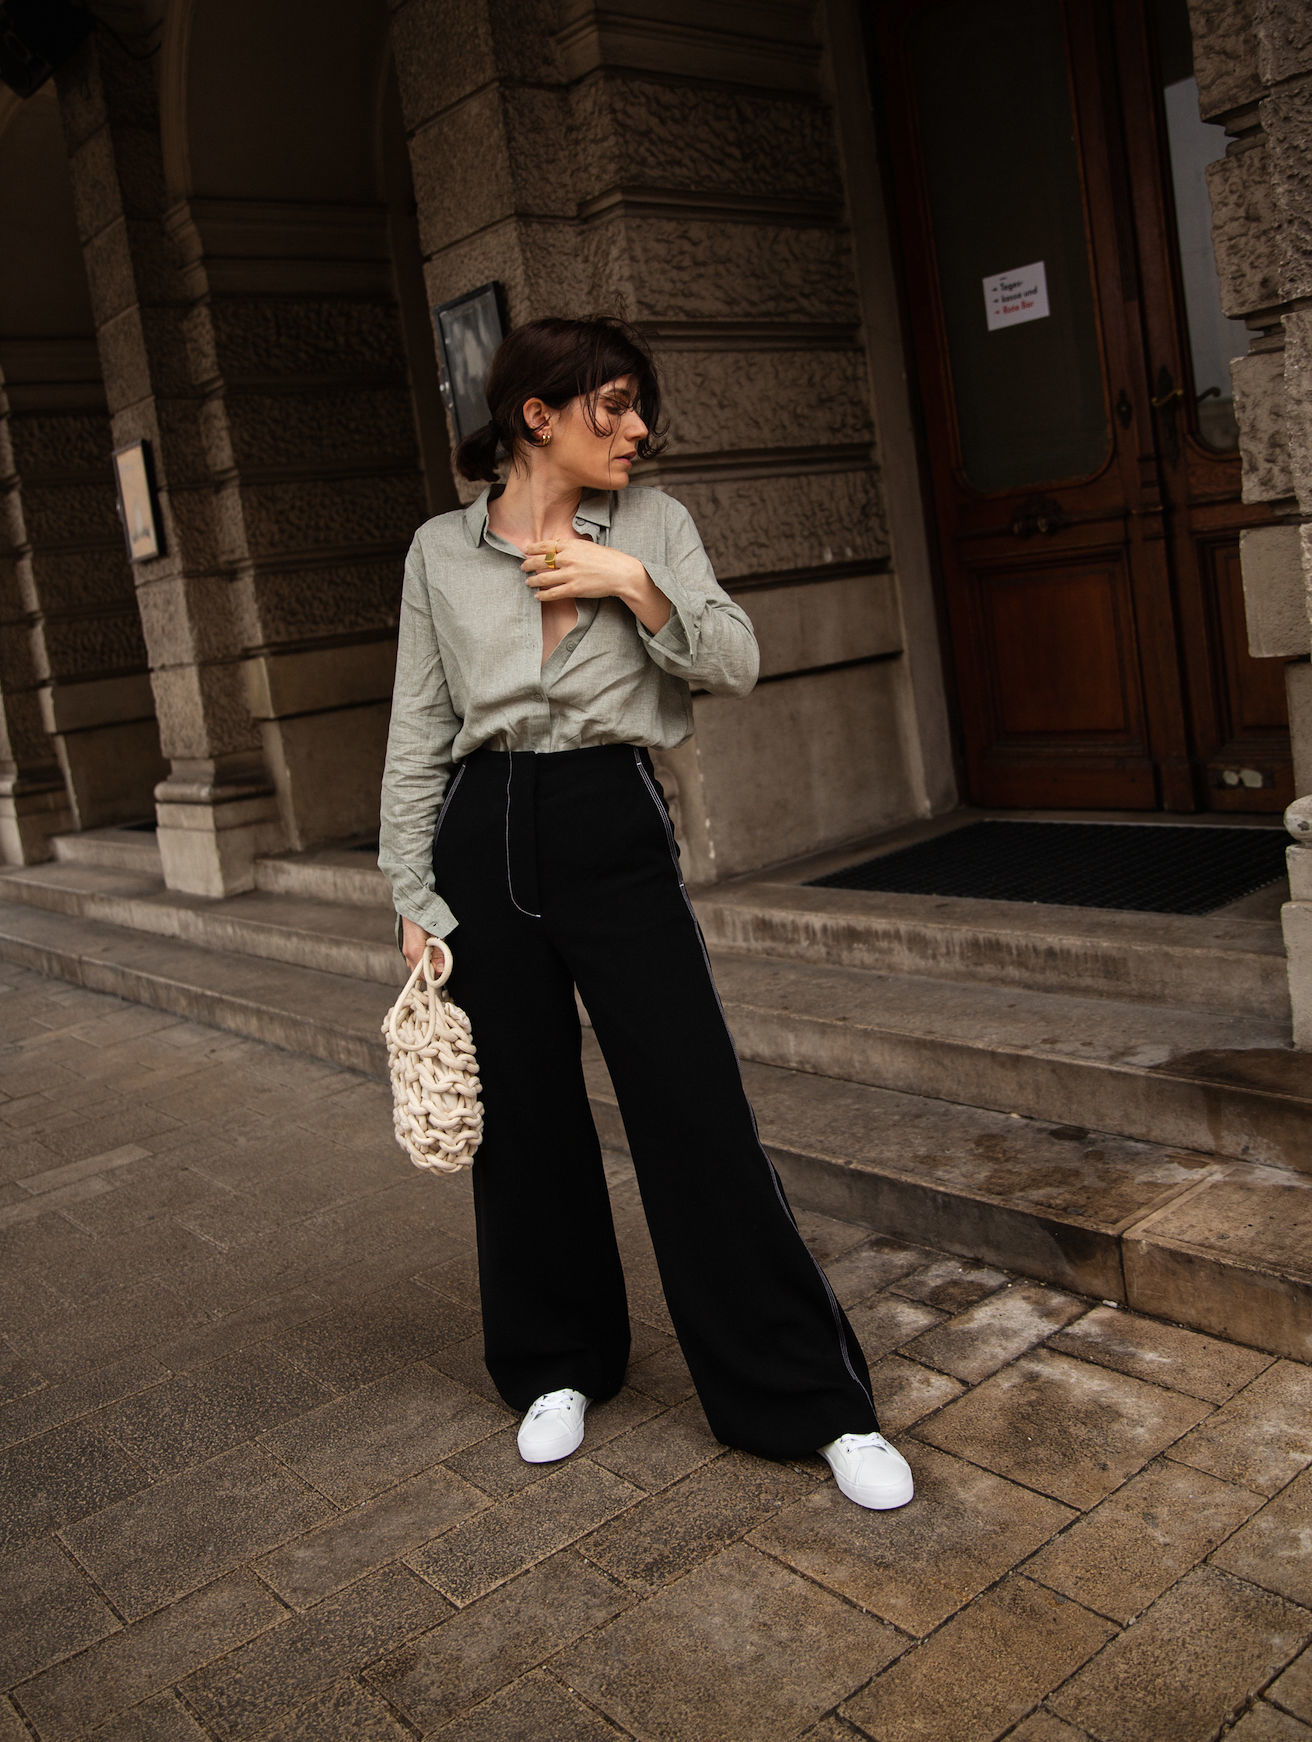 The Everyday: linen shirts + white sneakers I More up on viennawedekind.com #alienina #linenshirt